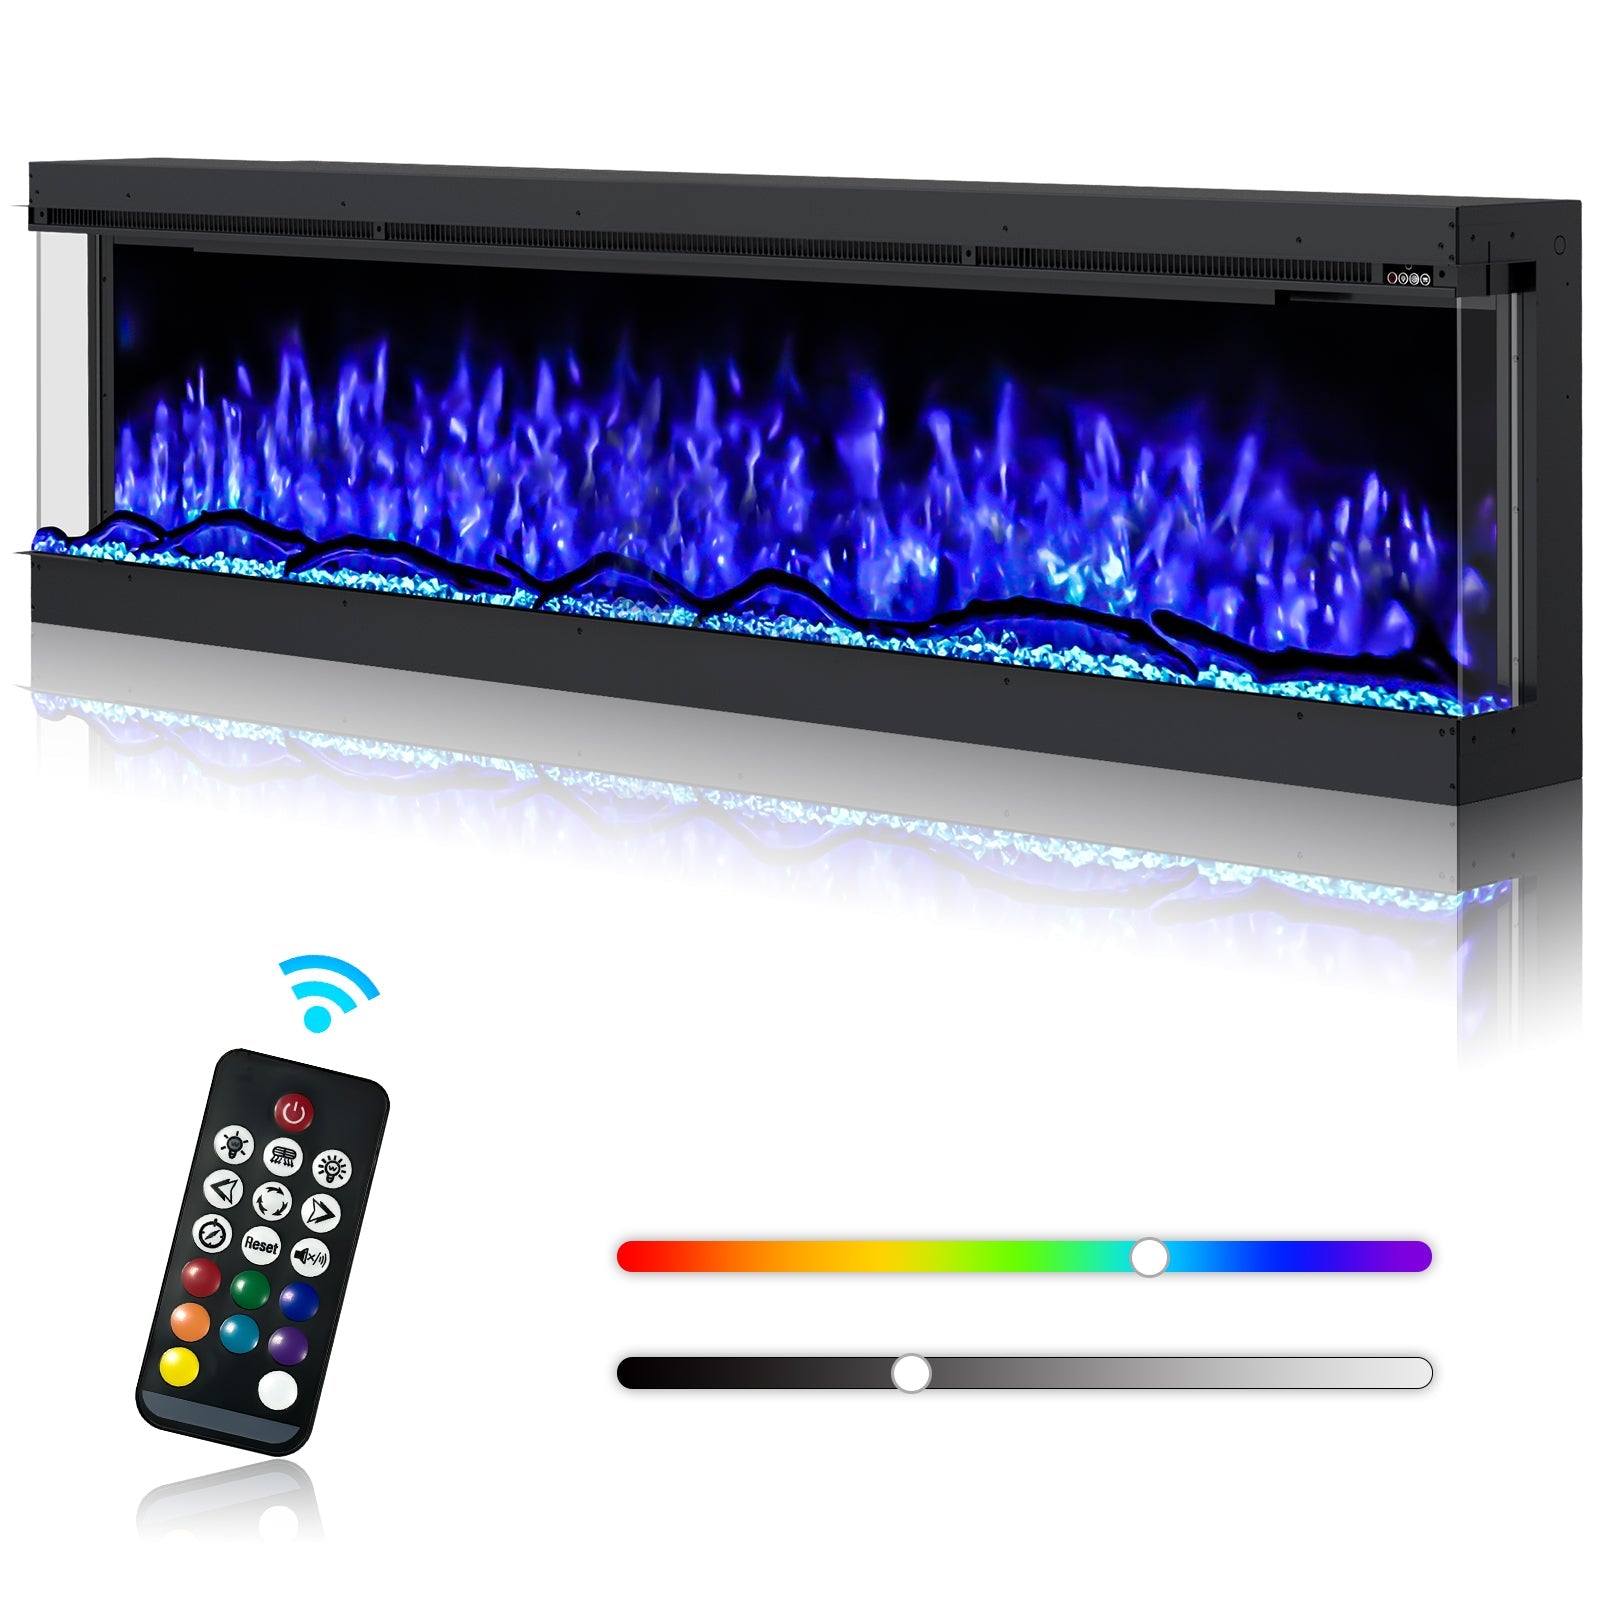 Inserts 3-Sided Electric Fireplace 60-inch Long Modern Eletric Fire Place Space Heater for Indoor Living Room Bedroom Use, Realistic Led Flame Color with Remote Control, Log & Crystals, Black